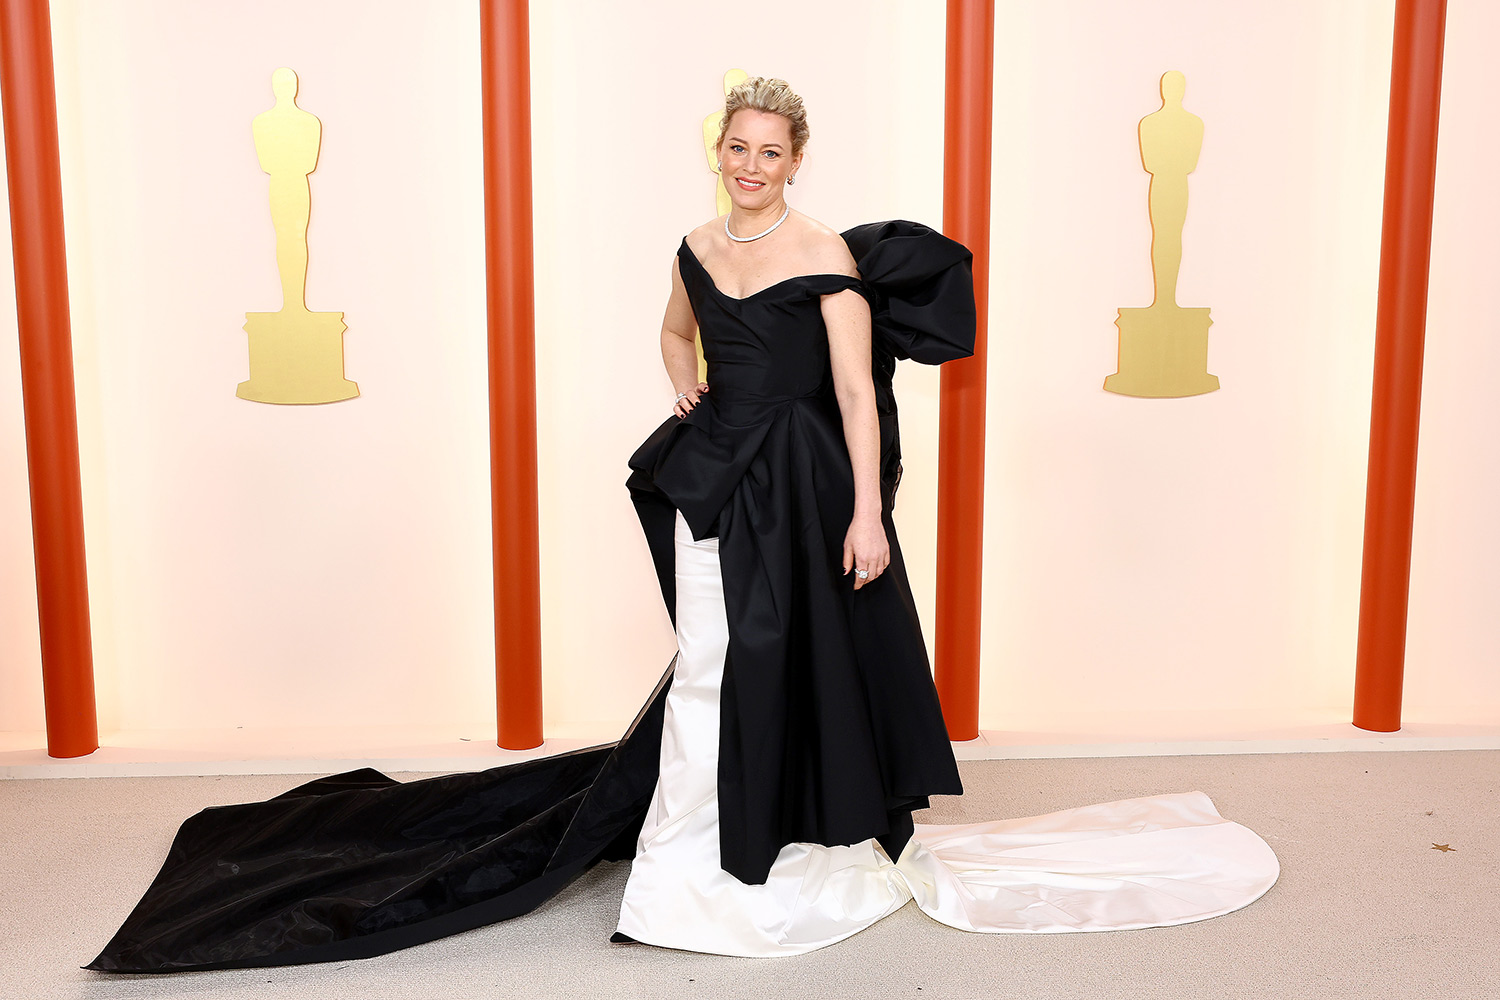 Elizabeth Banks on the Oscars 2023 95th Academy Awards red carpet in Los Angeles